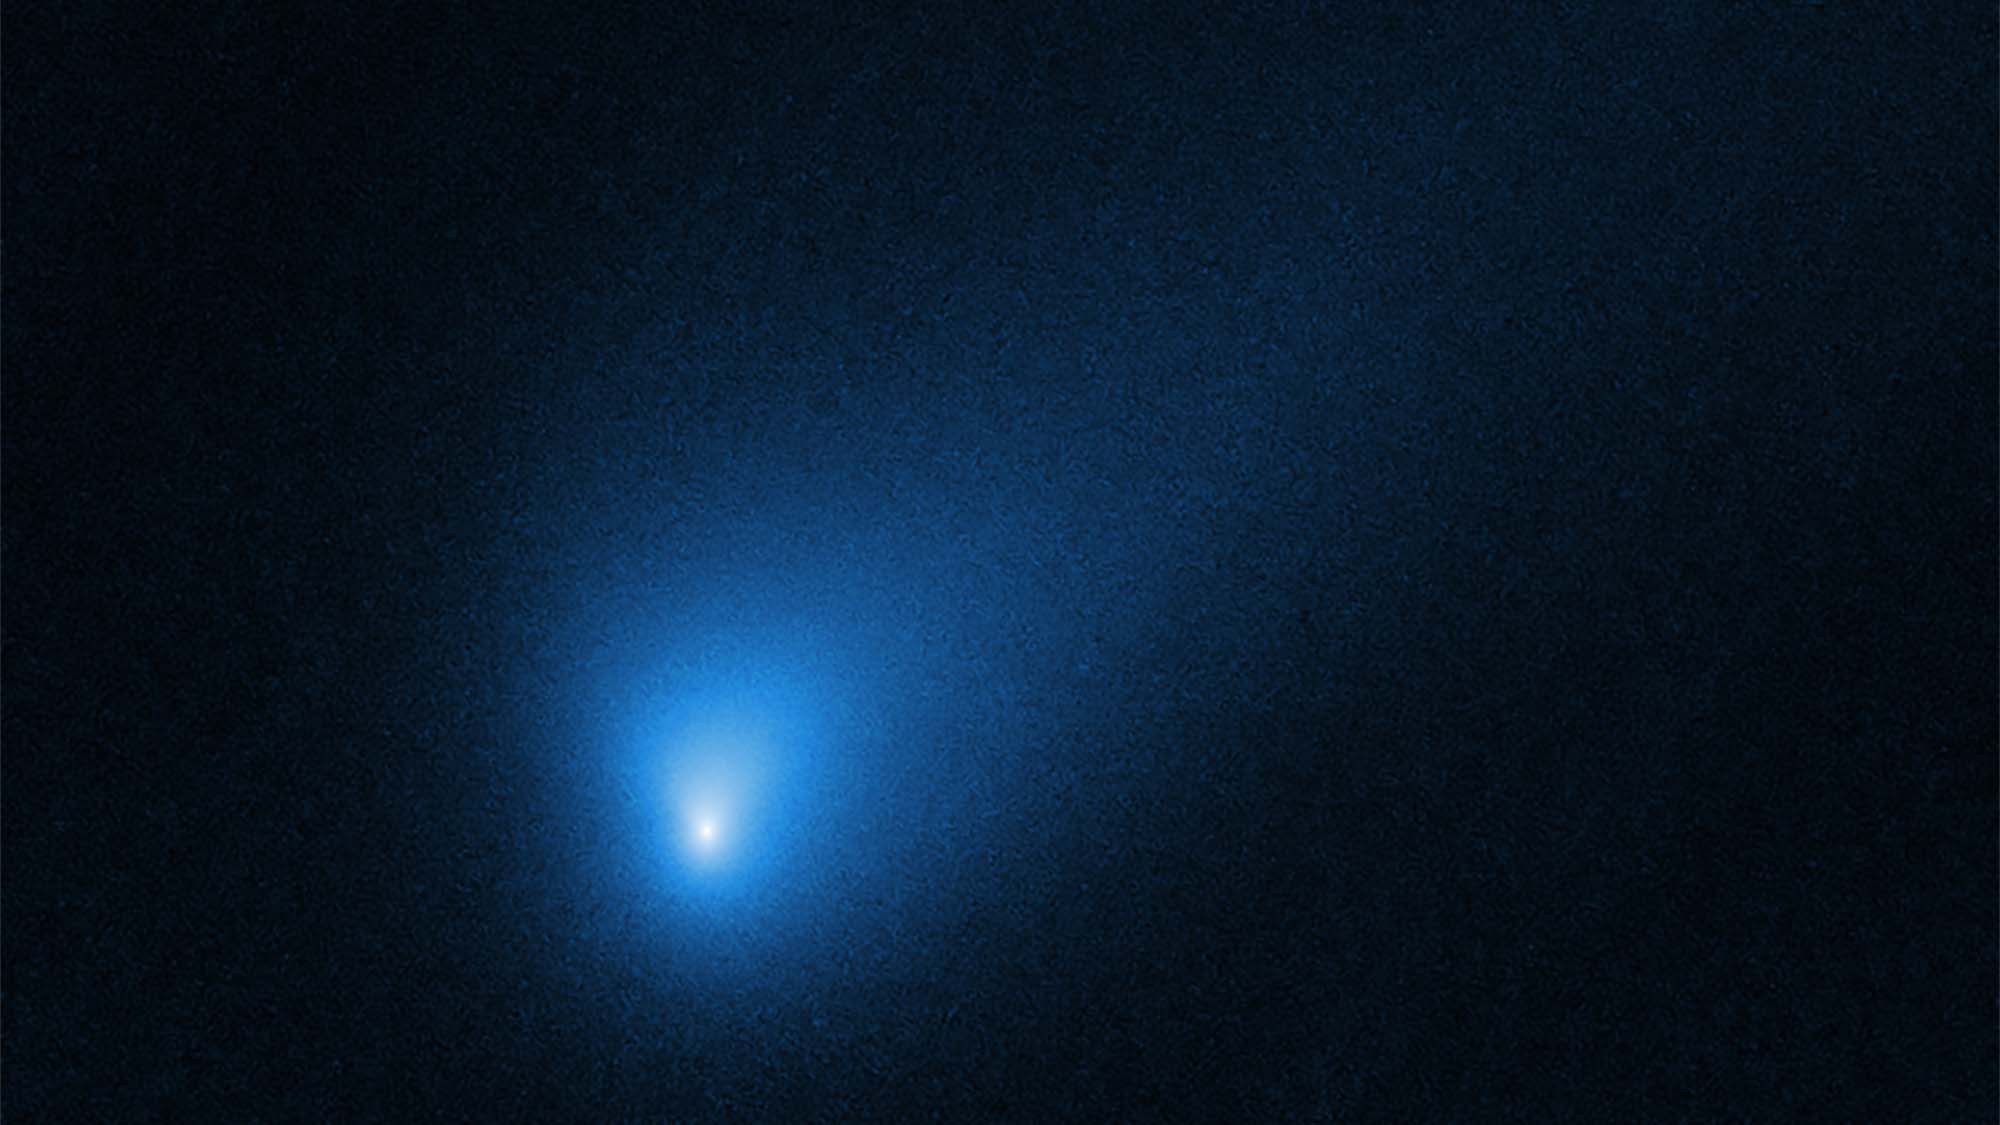 Rogue comet 2I/Borisov seen in a faint blue haze with a bright blue nucleus against the black backdrop of space